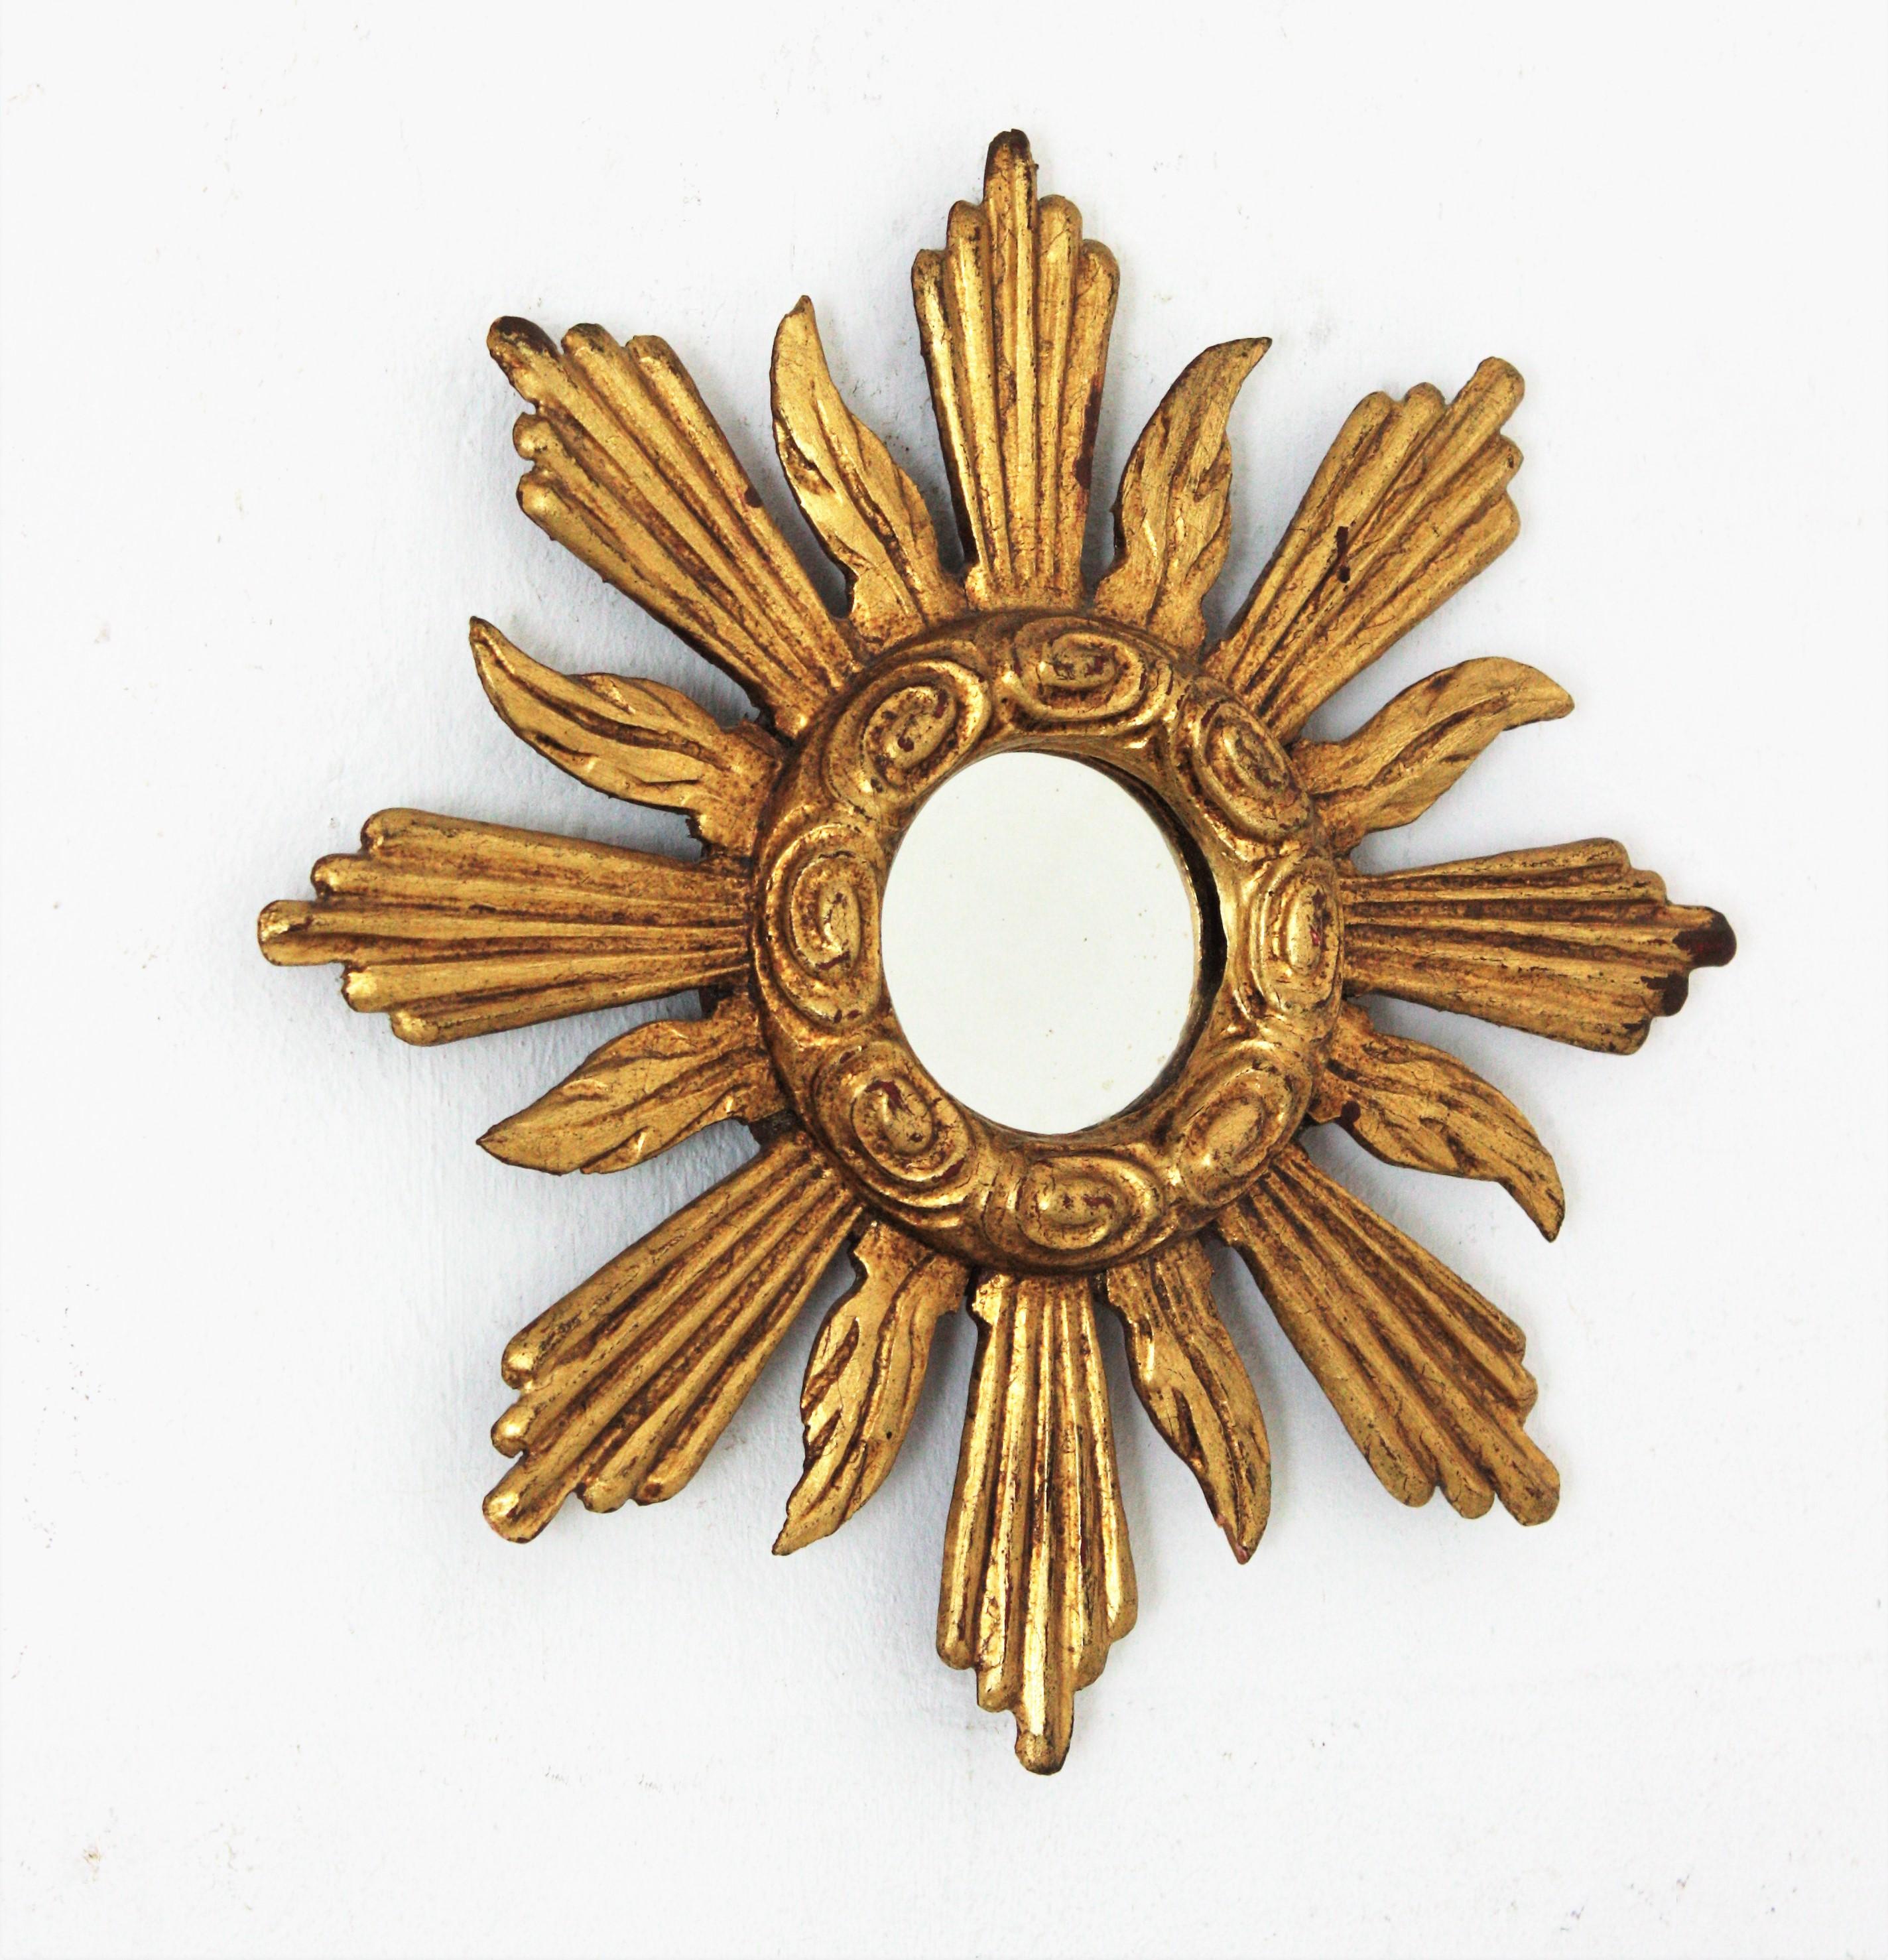 Mini sized sunburst mirror, carved wood, gold leaf. Spain, 1940s
Eye-catching finely carved sunburst mirror with rays in two sizes and geometric and striped decorations.
Nice aged patina and original gold leaf gilding.
This lovely mini sunburst